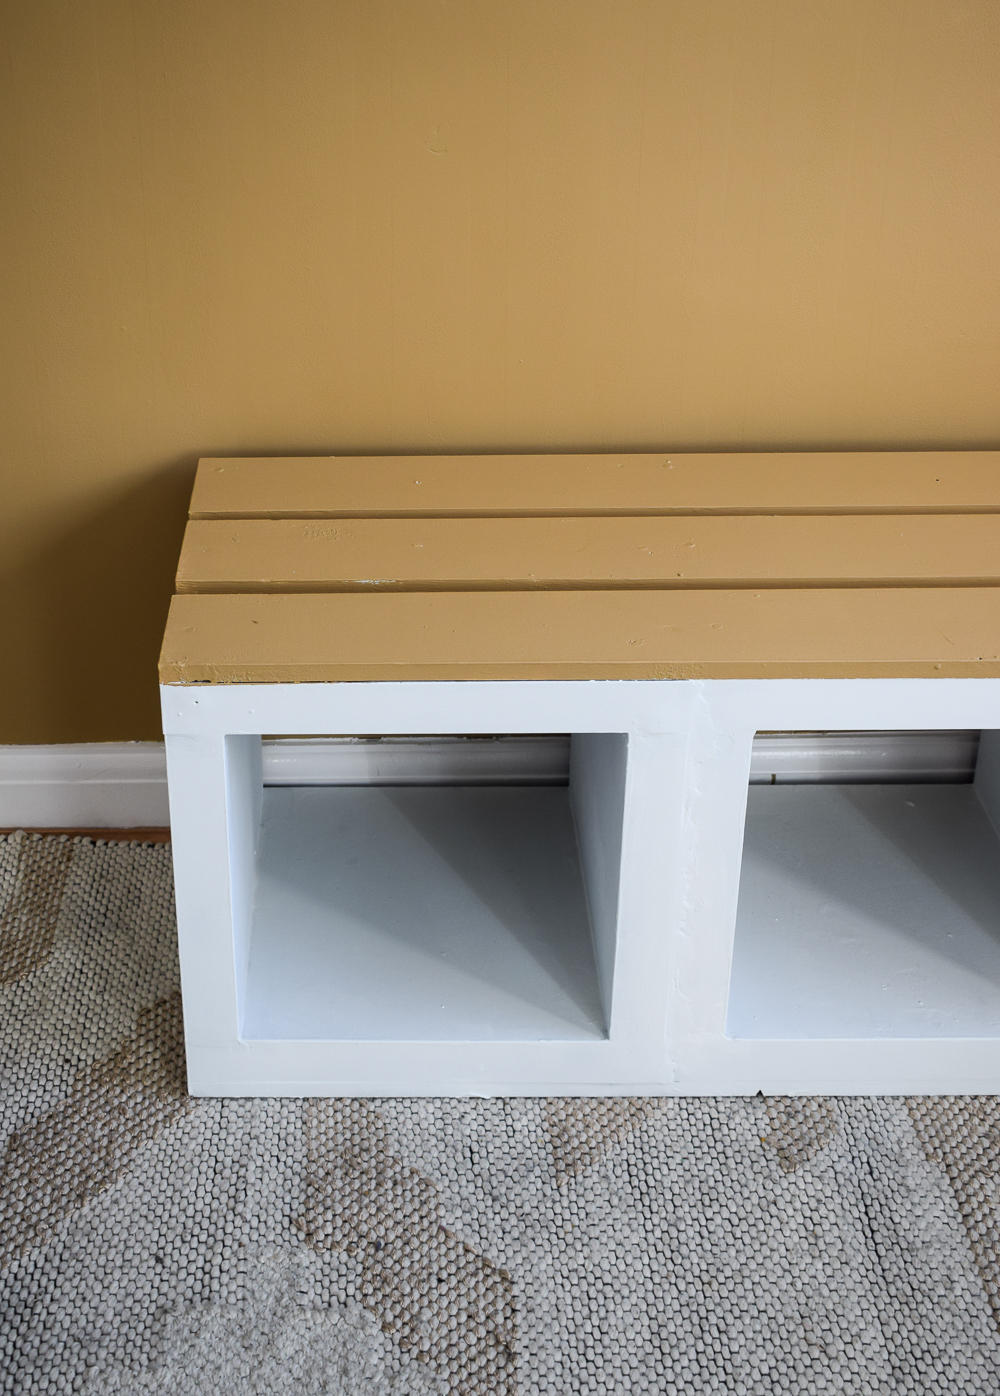 IKEA KALLAX bench after being painted. The top is brown and the rest of the bench is white